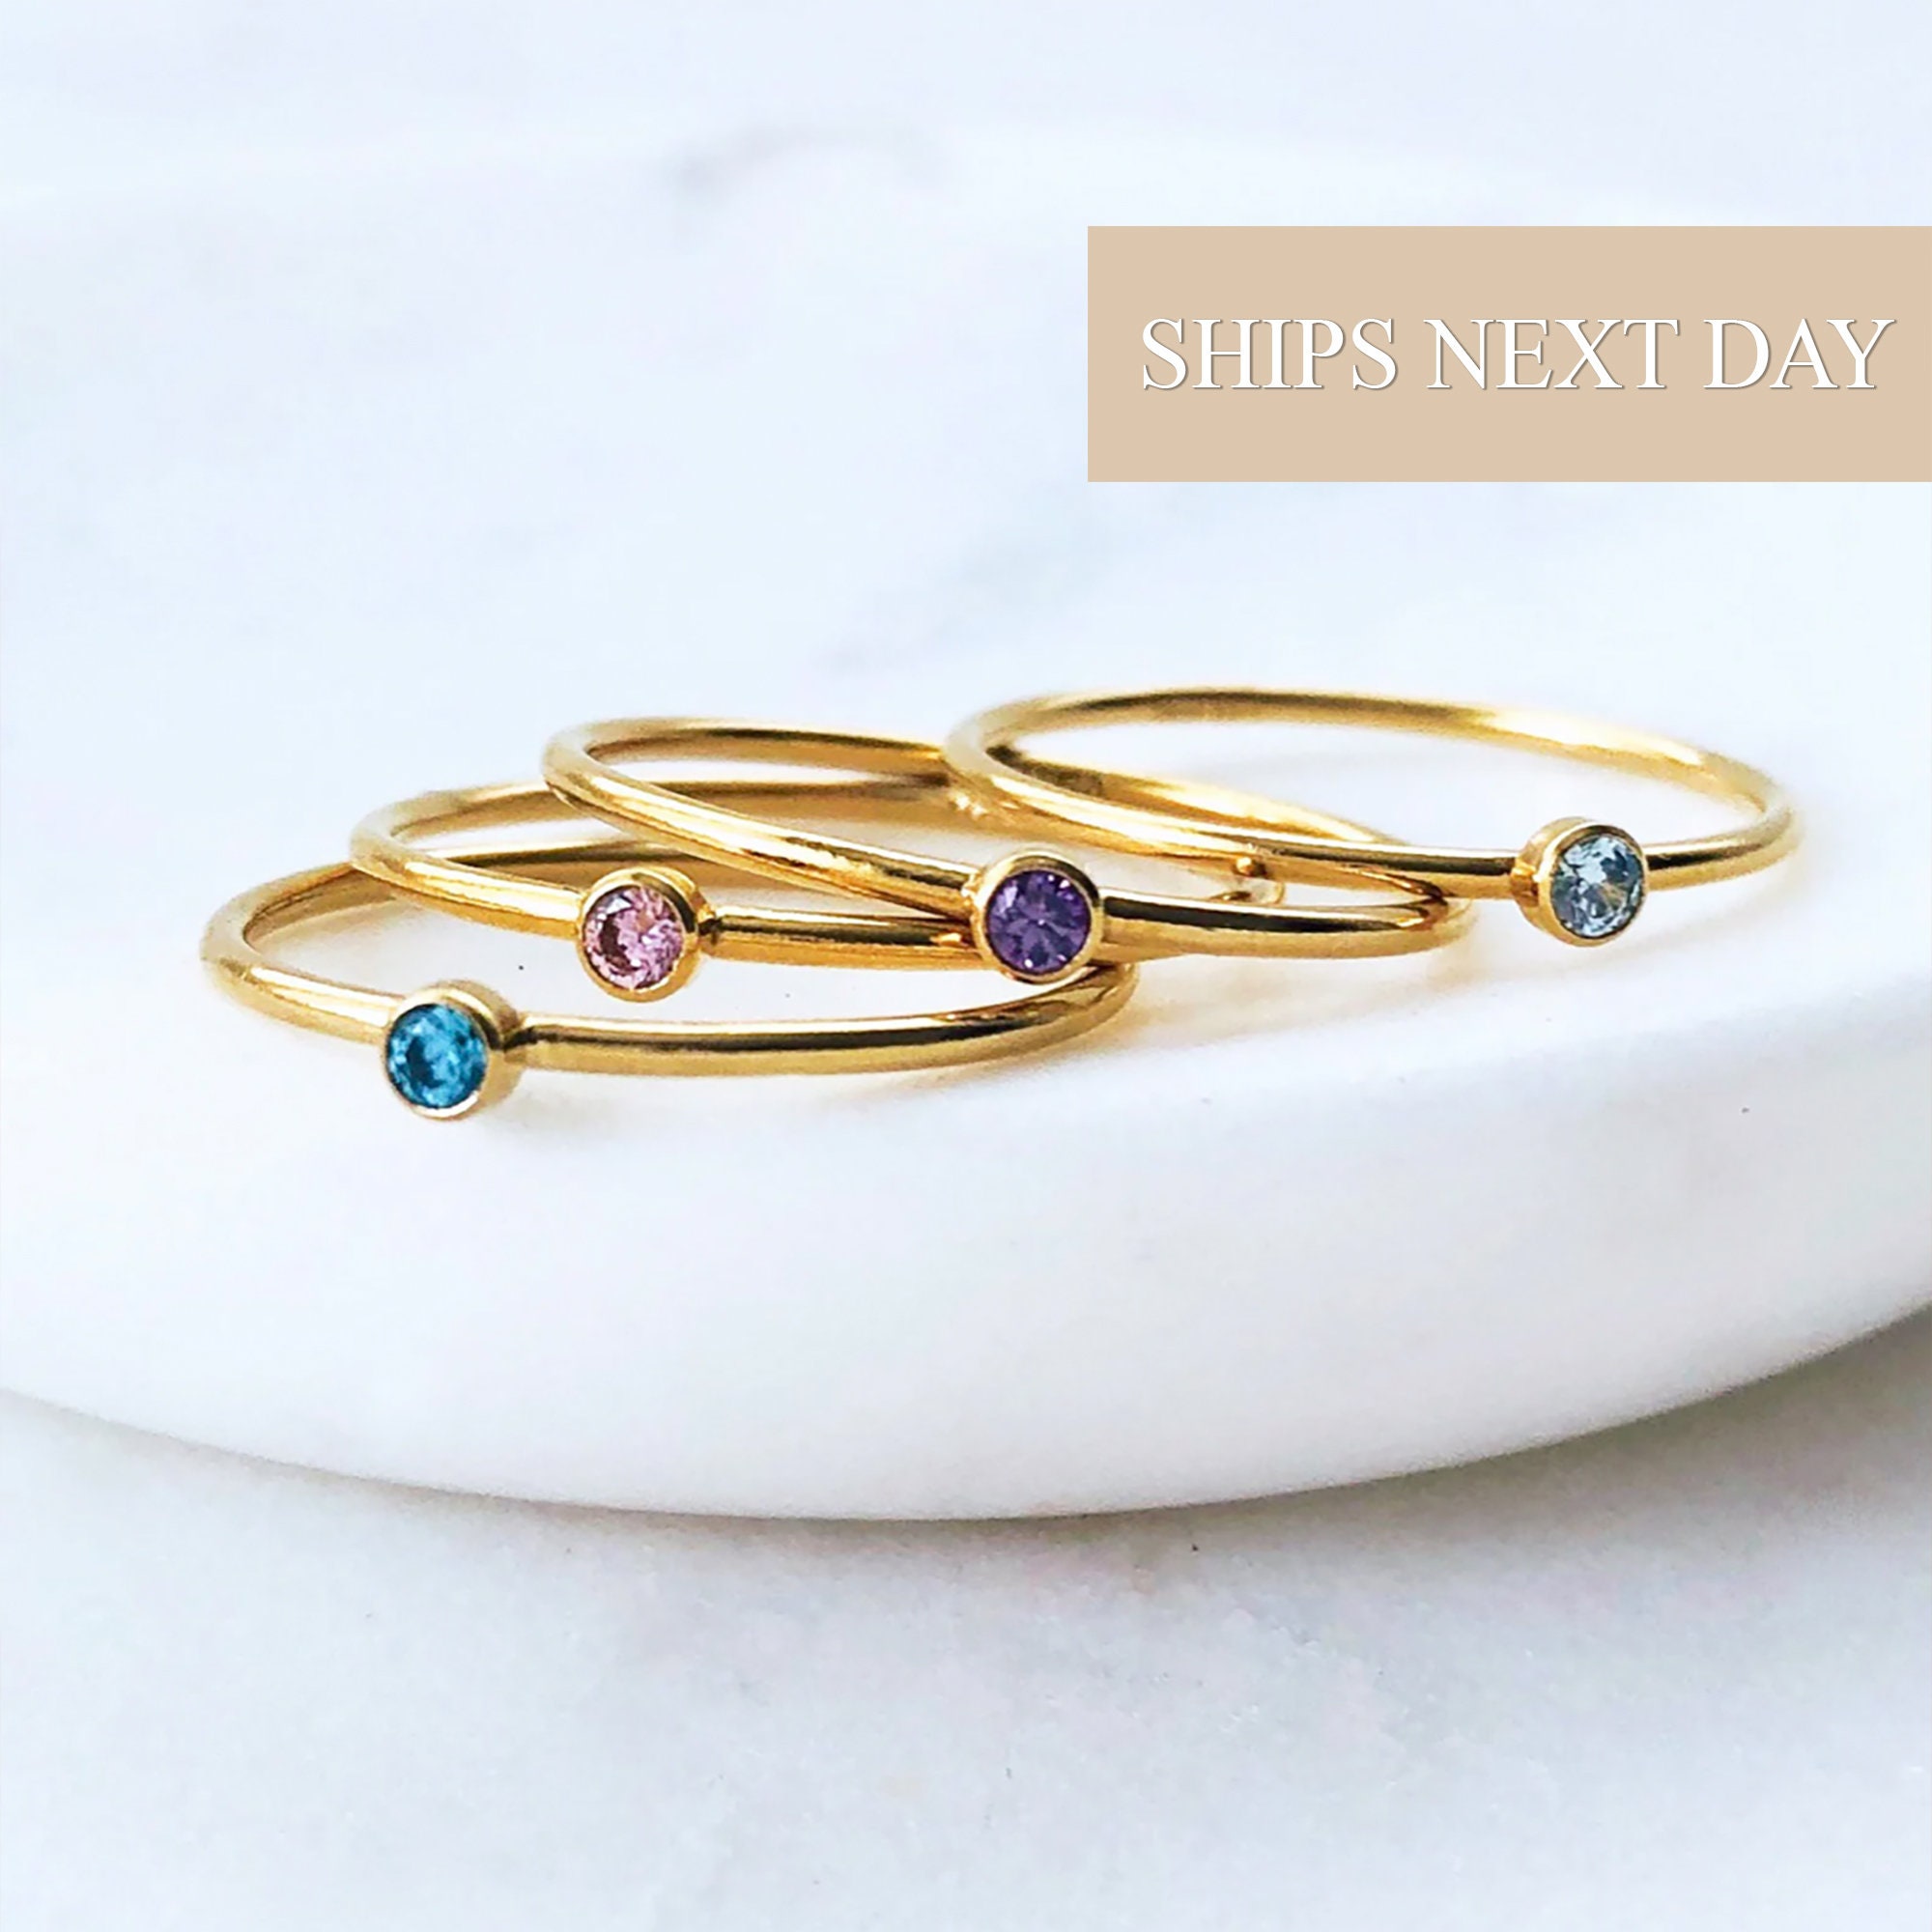 Girls March Birthstone Flower Ring in 14K Gold with Light Aqua CZ - Size 5  - The Jewelry Vine